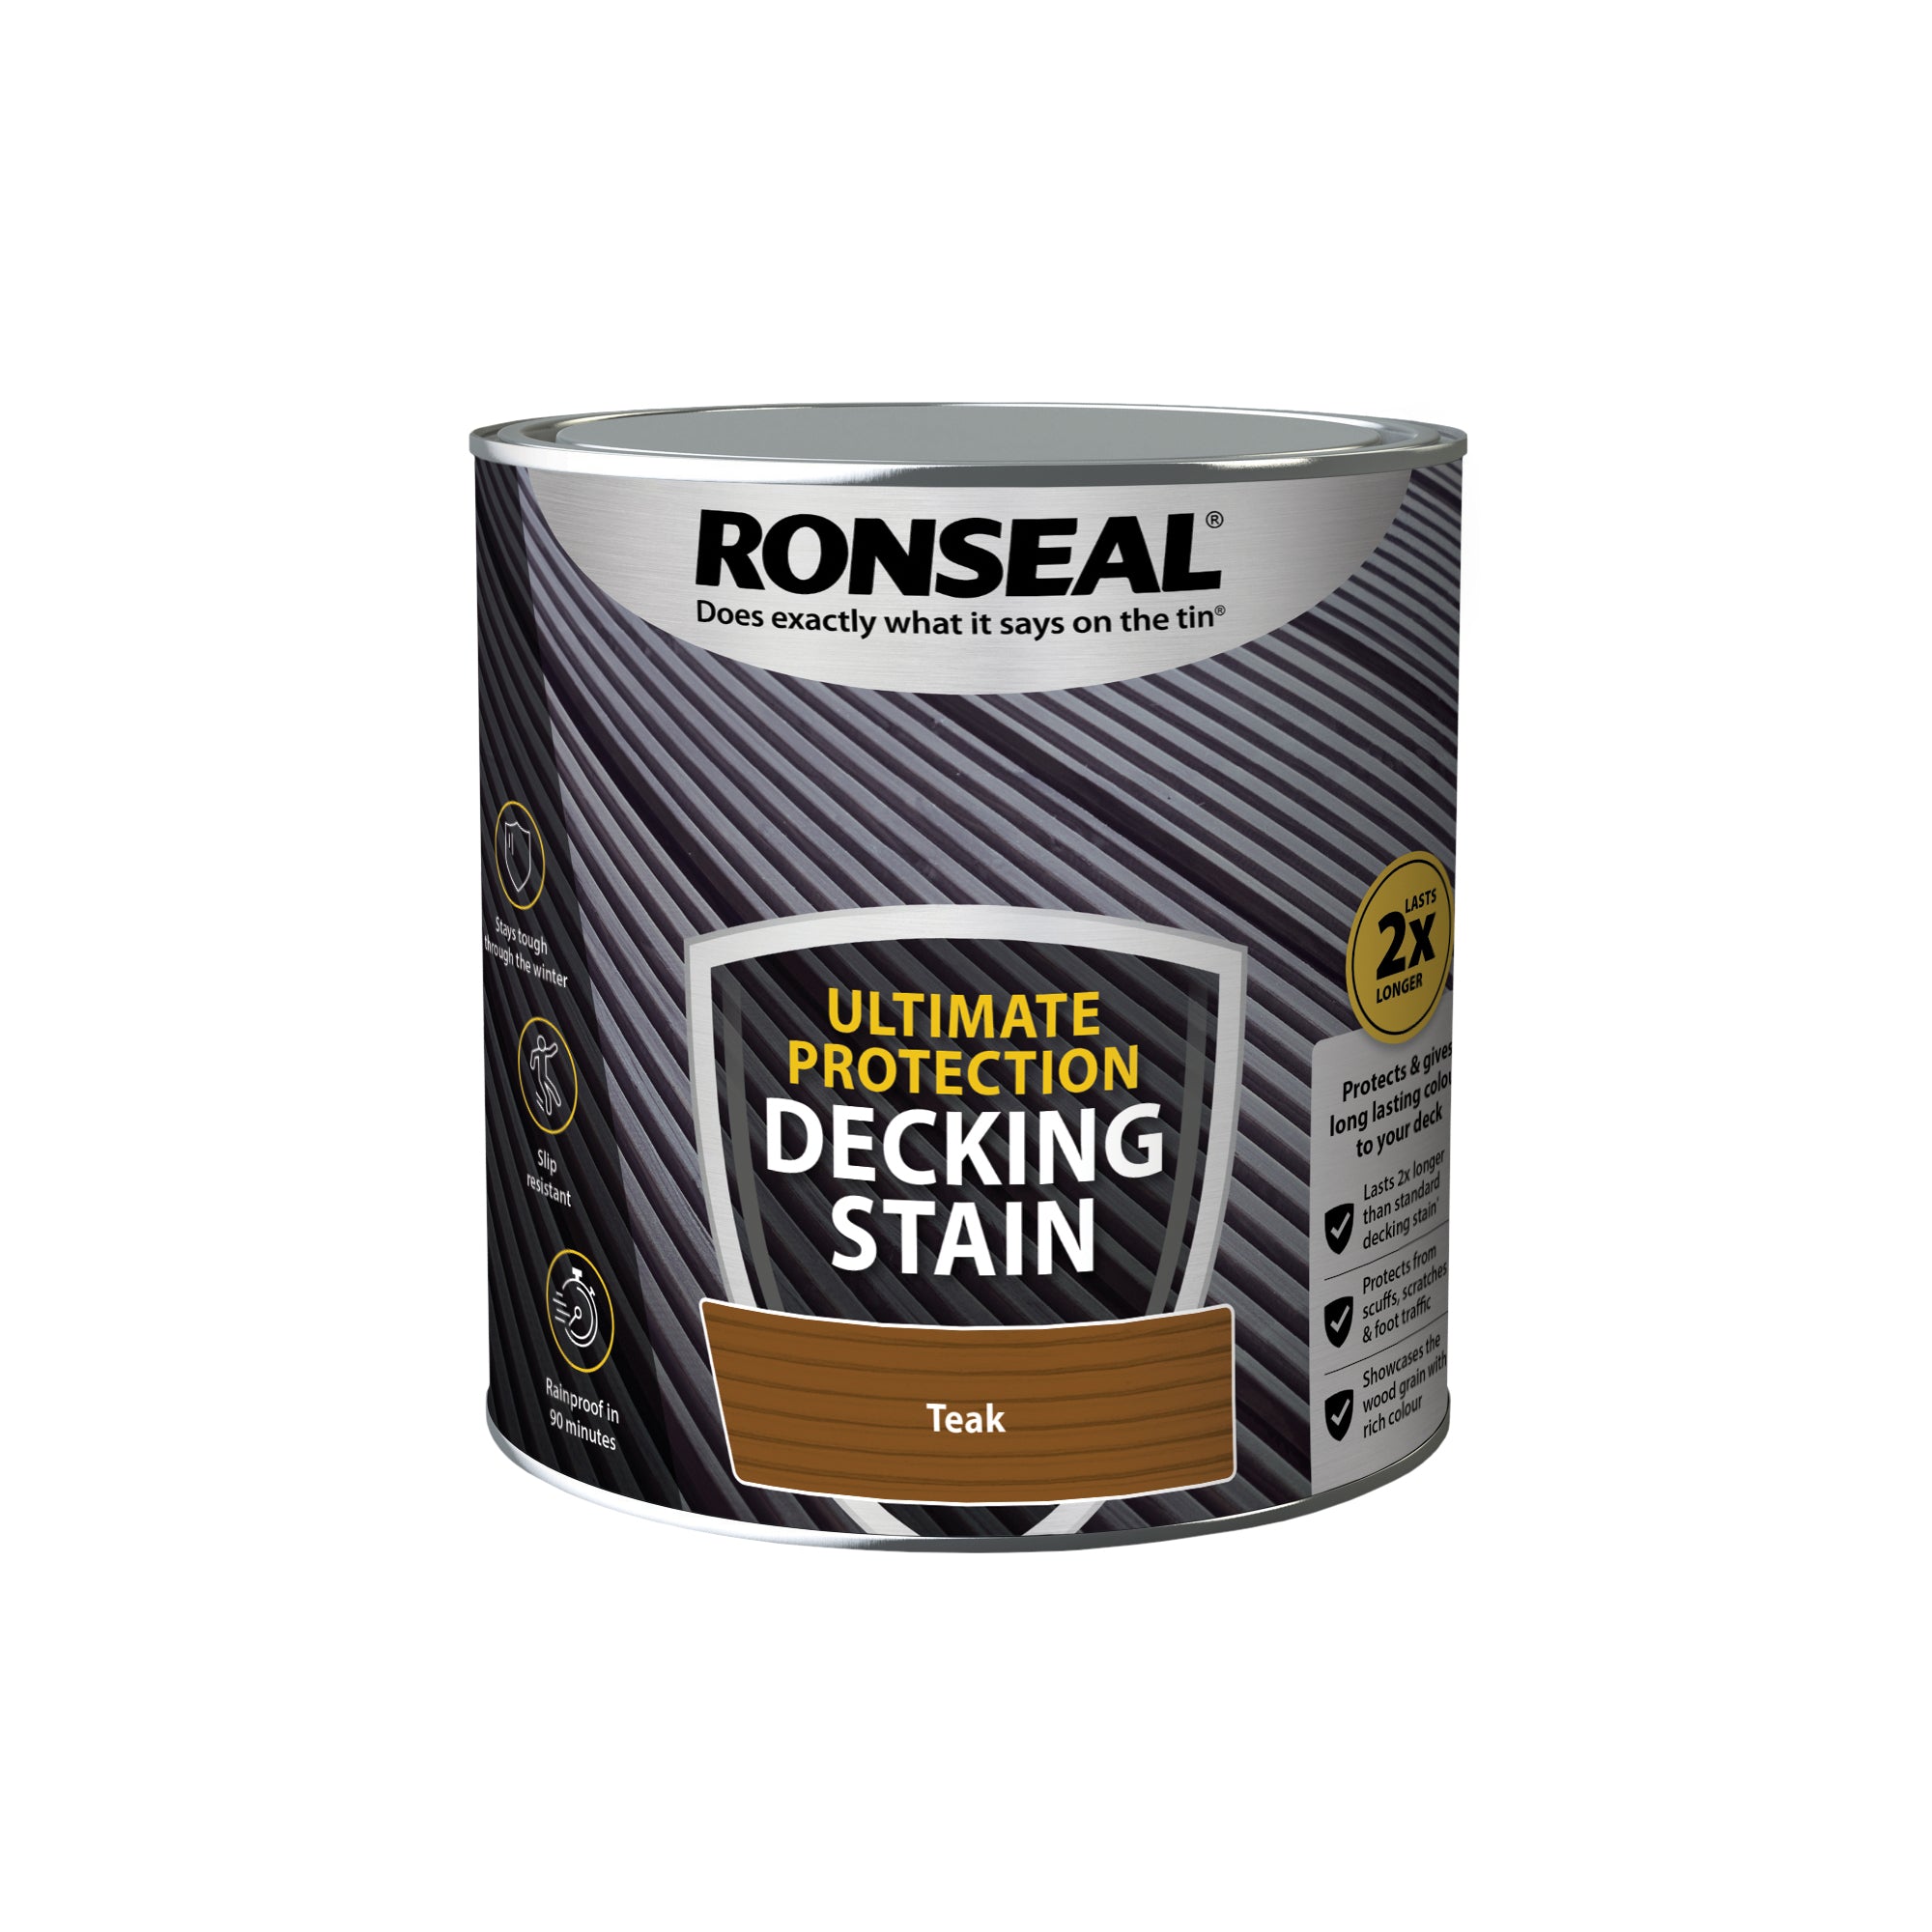 Ronseal-Ultimate-Protection-Decking-Stain-Teak-2.5L